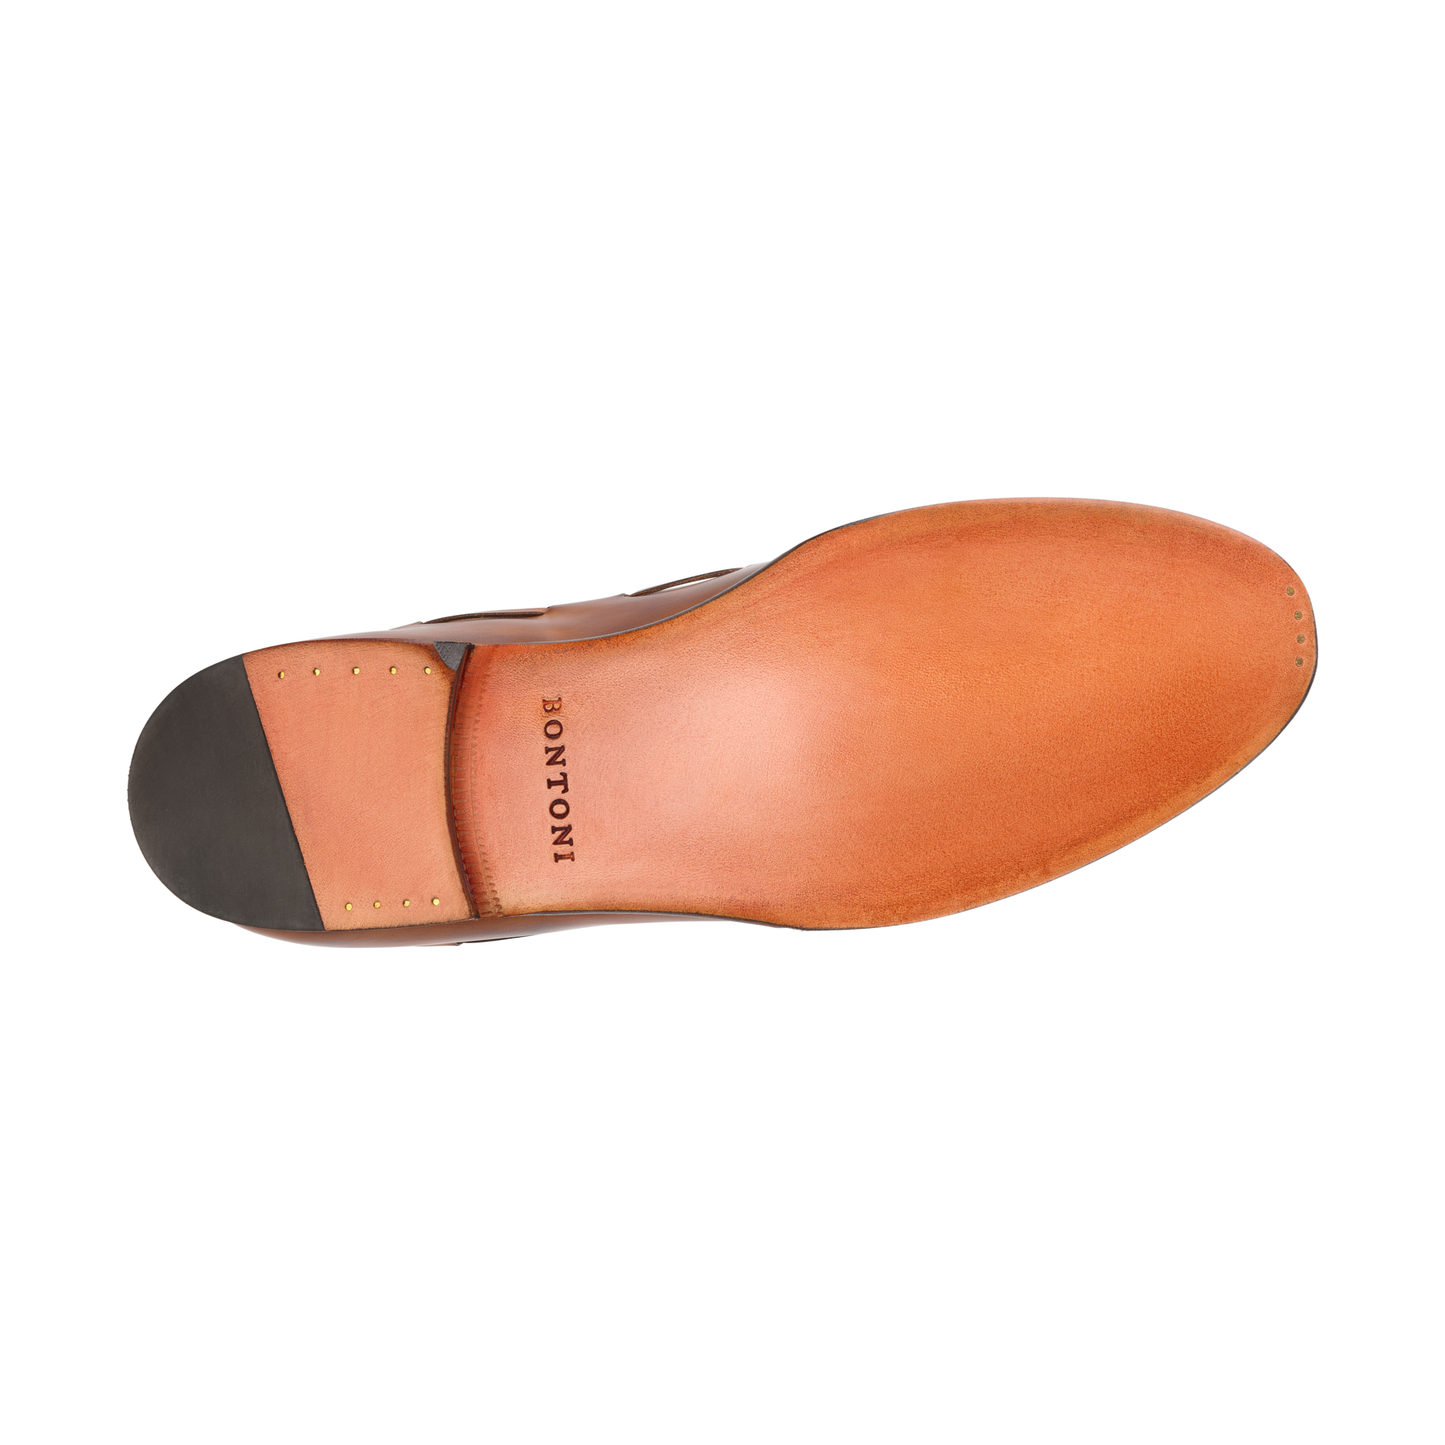 Bontoni «Conte Massimo» Leather Tassel Loafer with Hand-Stitched Apron in Cognac - SARTALE